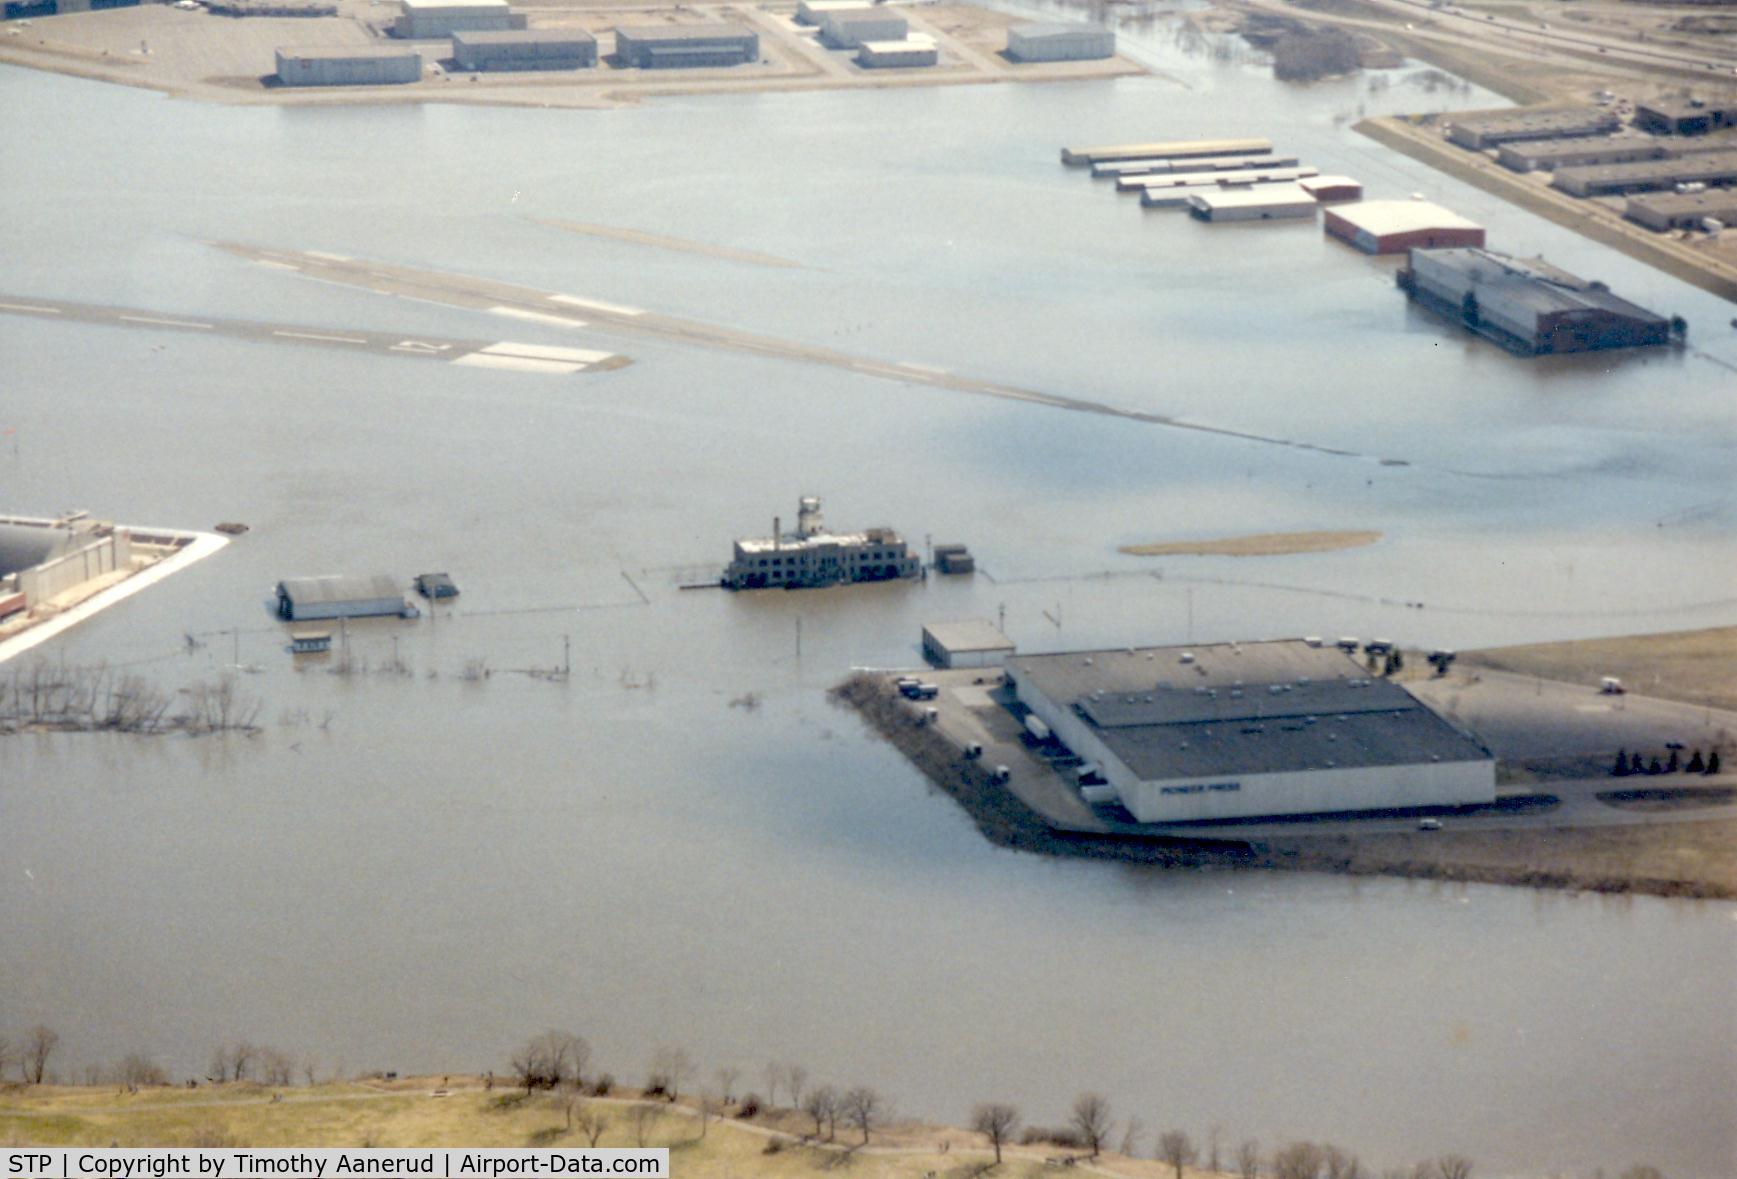 St Paul Downtown Holman Fld Airport (STP) - ~1995 flood at STP.  The Mississippi River floods this airport so often the airport has a procedures manual.  They will even preflood some of the buildings because it's easier to clean up afterwards.